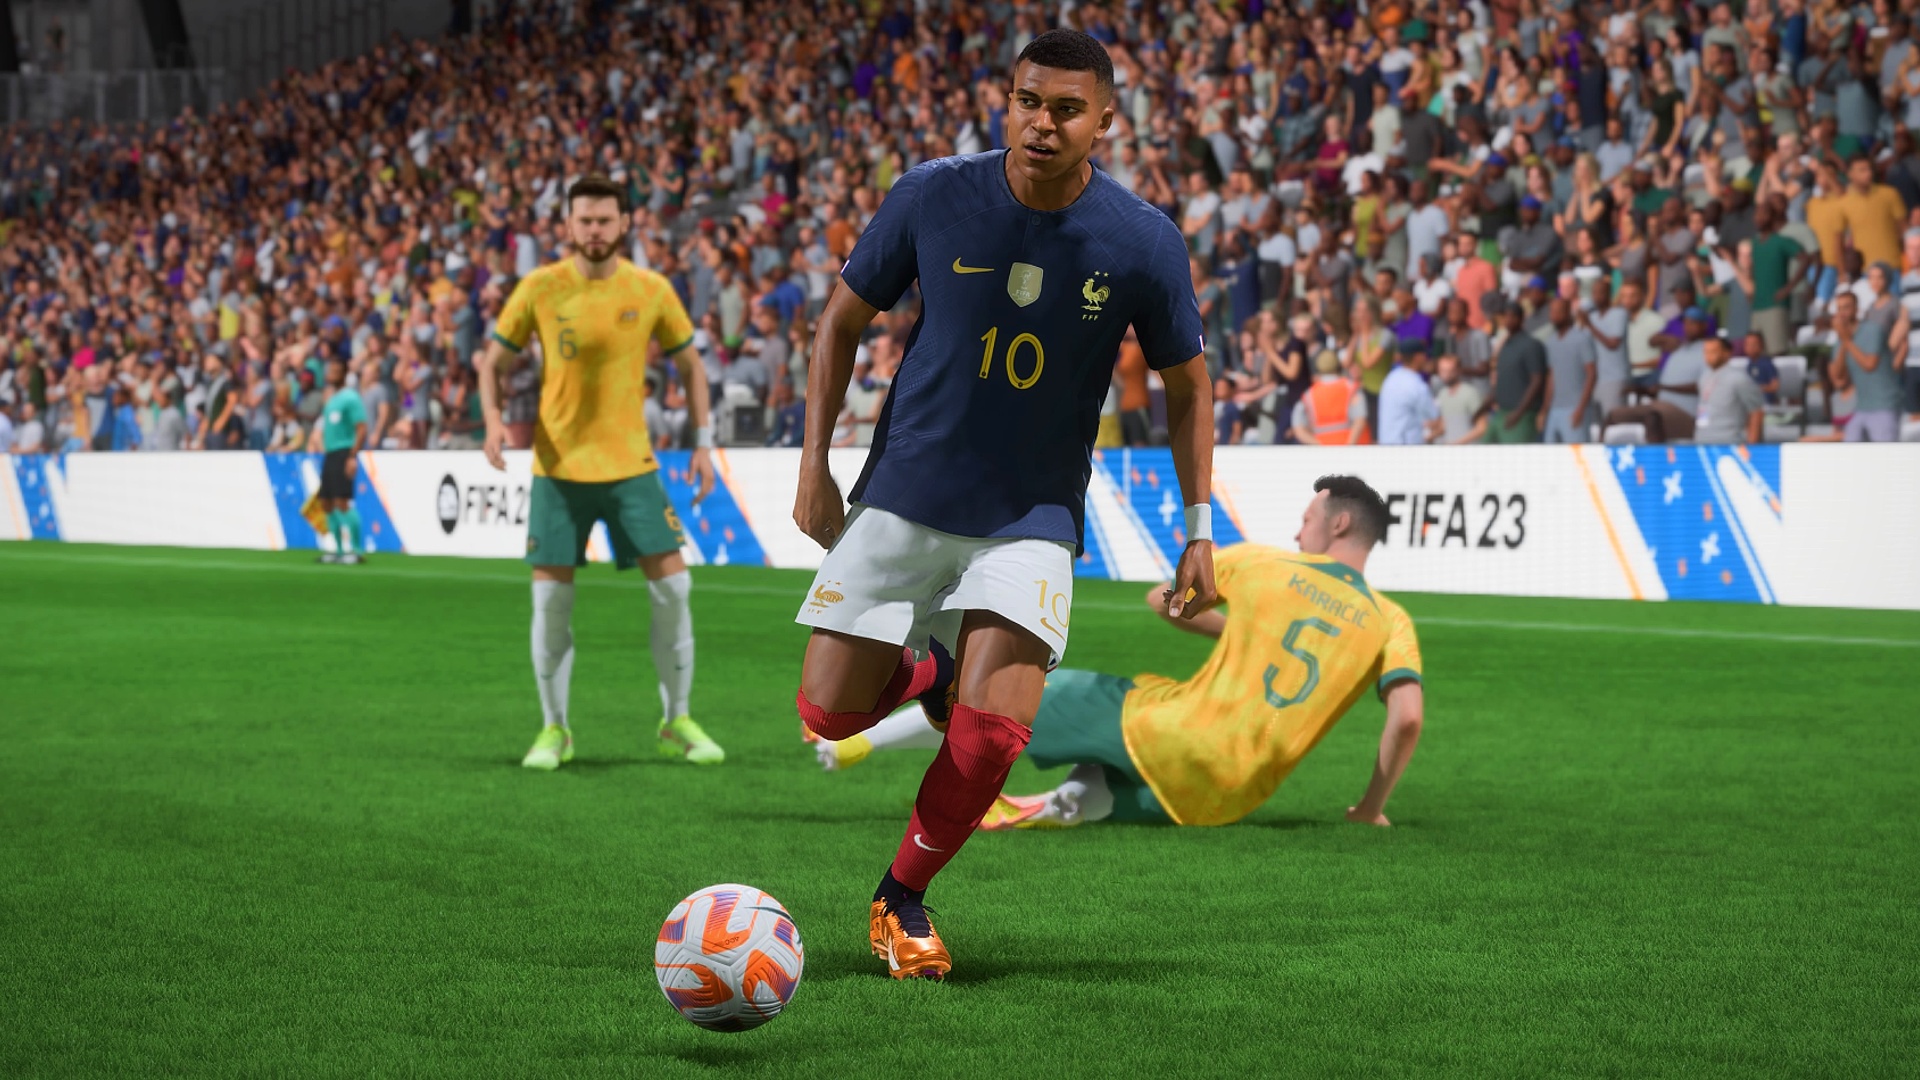 FIFA 23 TOTY squad revealed – Lionel Messi, Kylian Mbappe and TOTY